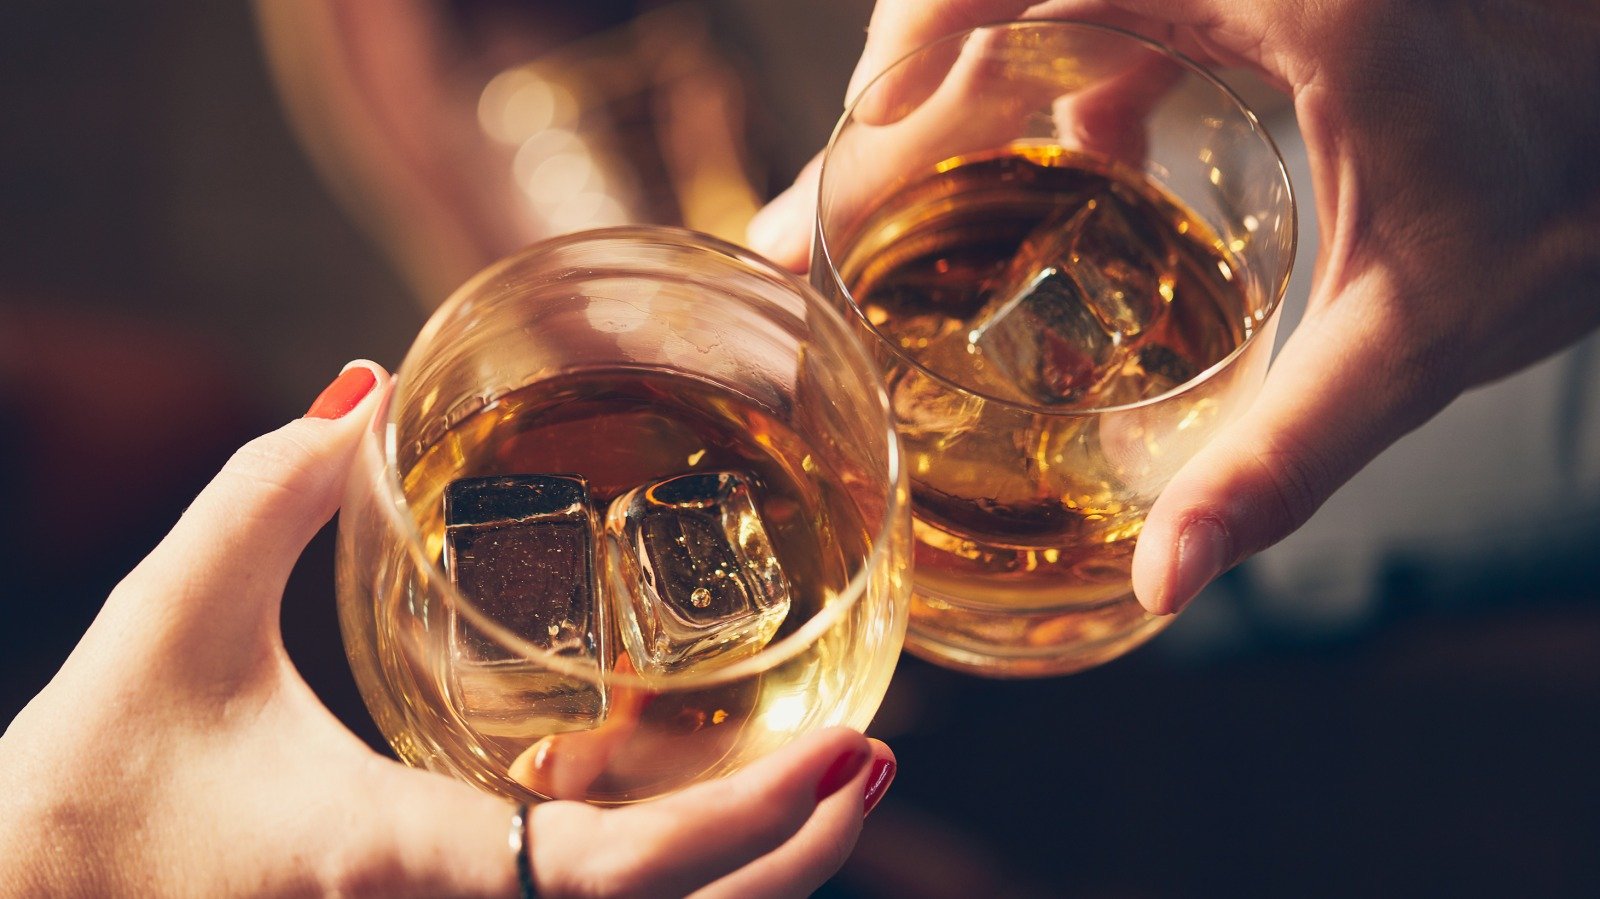 When You Drink Whiskey Daily, This Is What You're Really Doing To Your Body